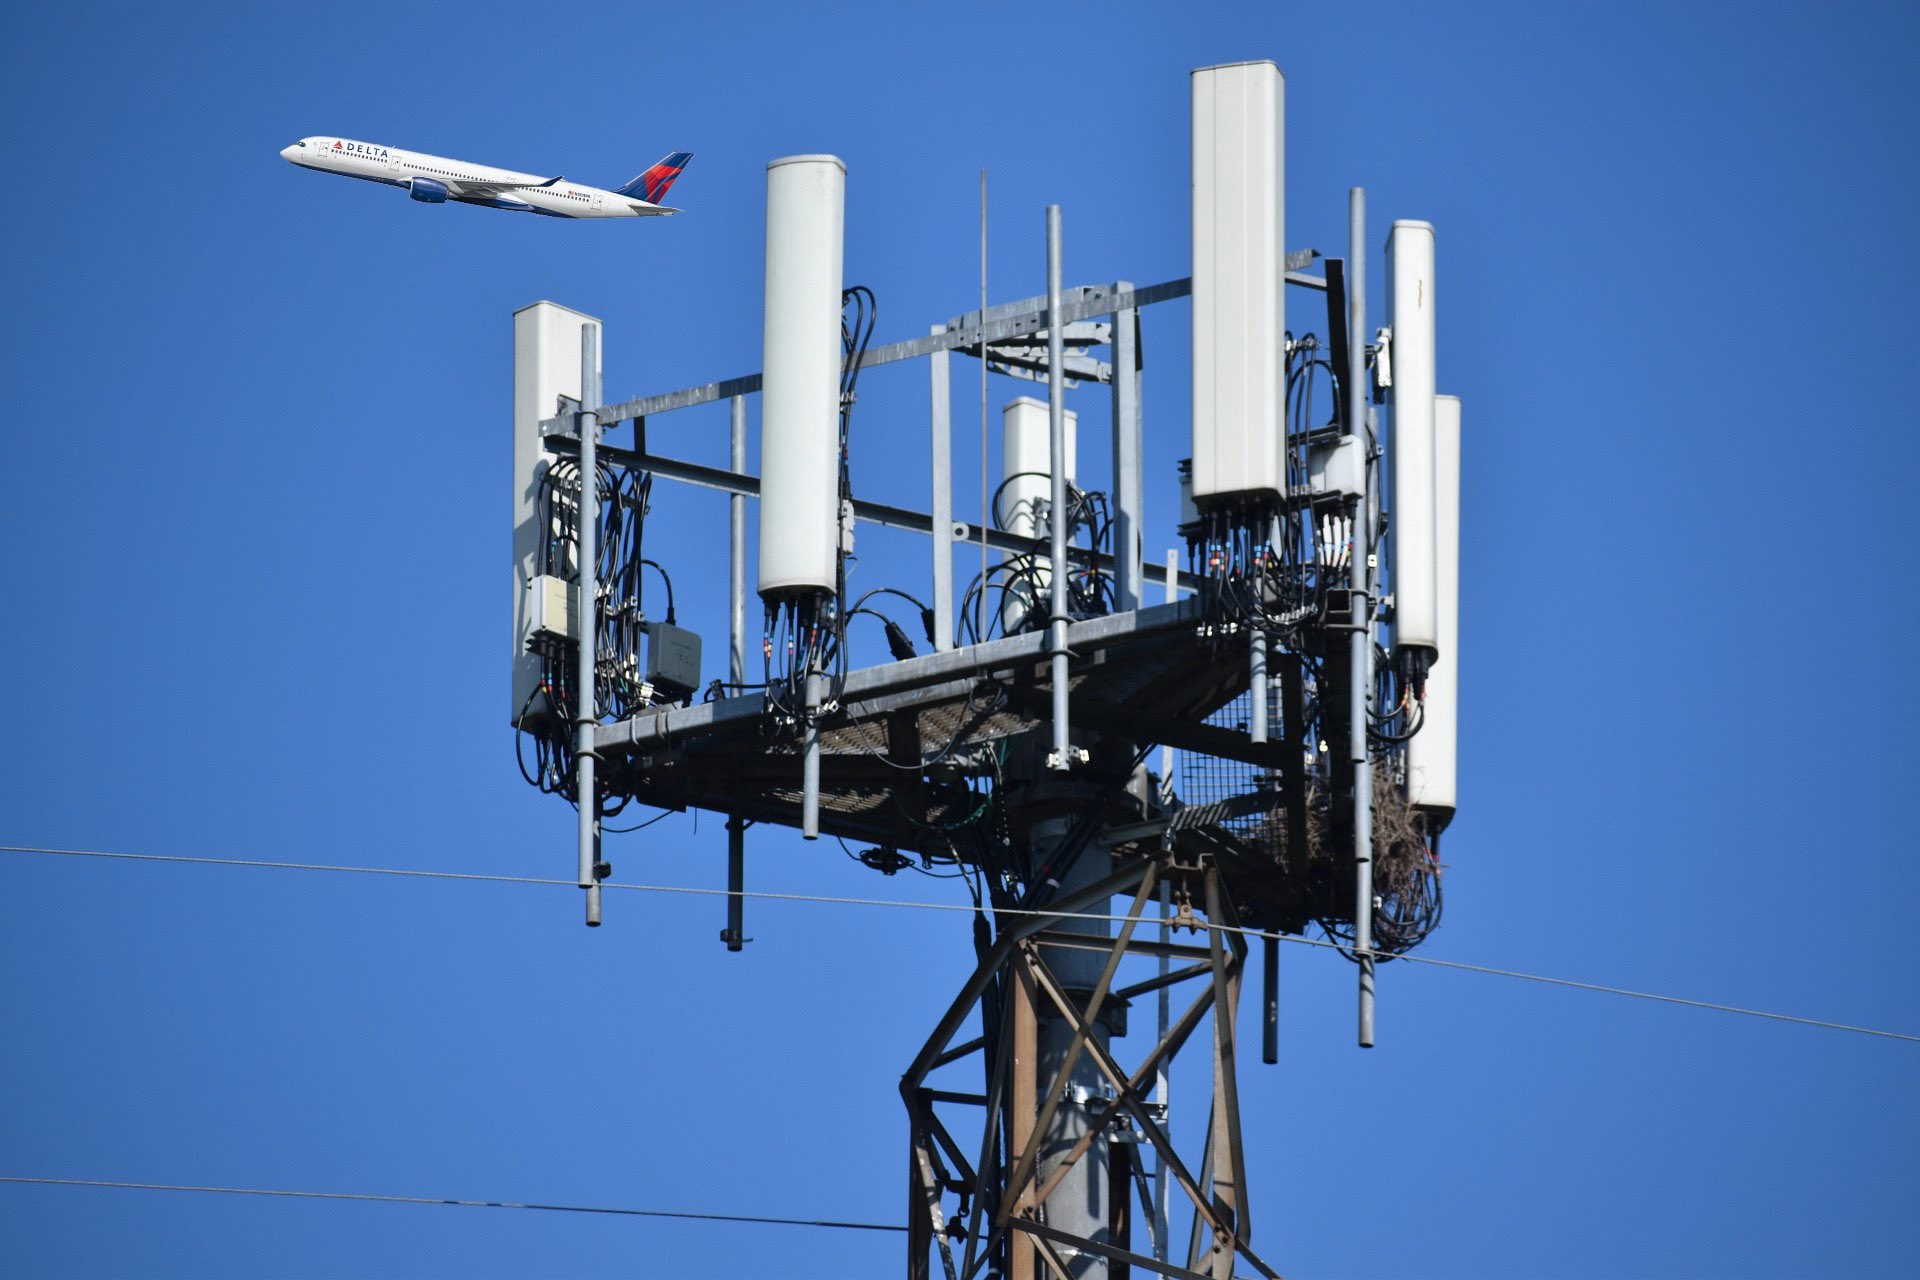 The FAA fears that 5G's C-band band could interfere with radio altimeters, which are devices that measure the height of planes above the ground and help pilots land in low visibility.